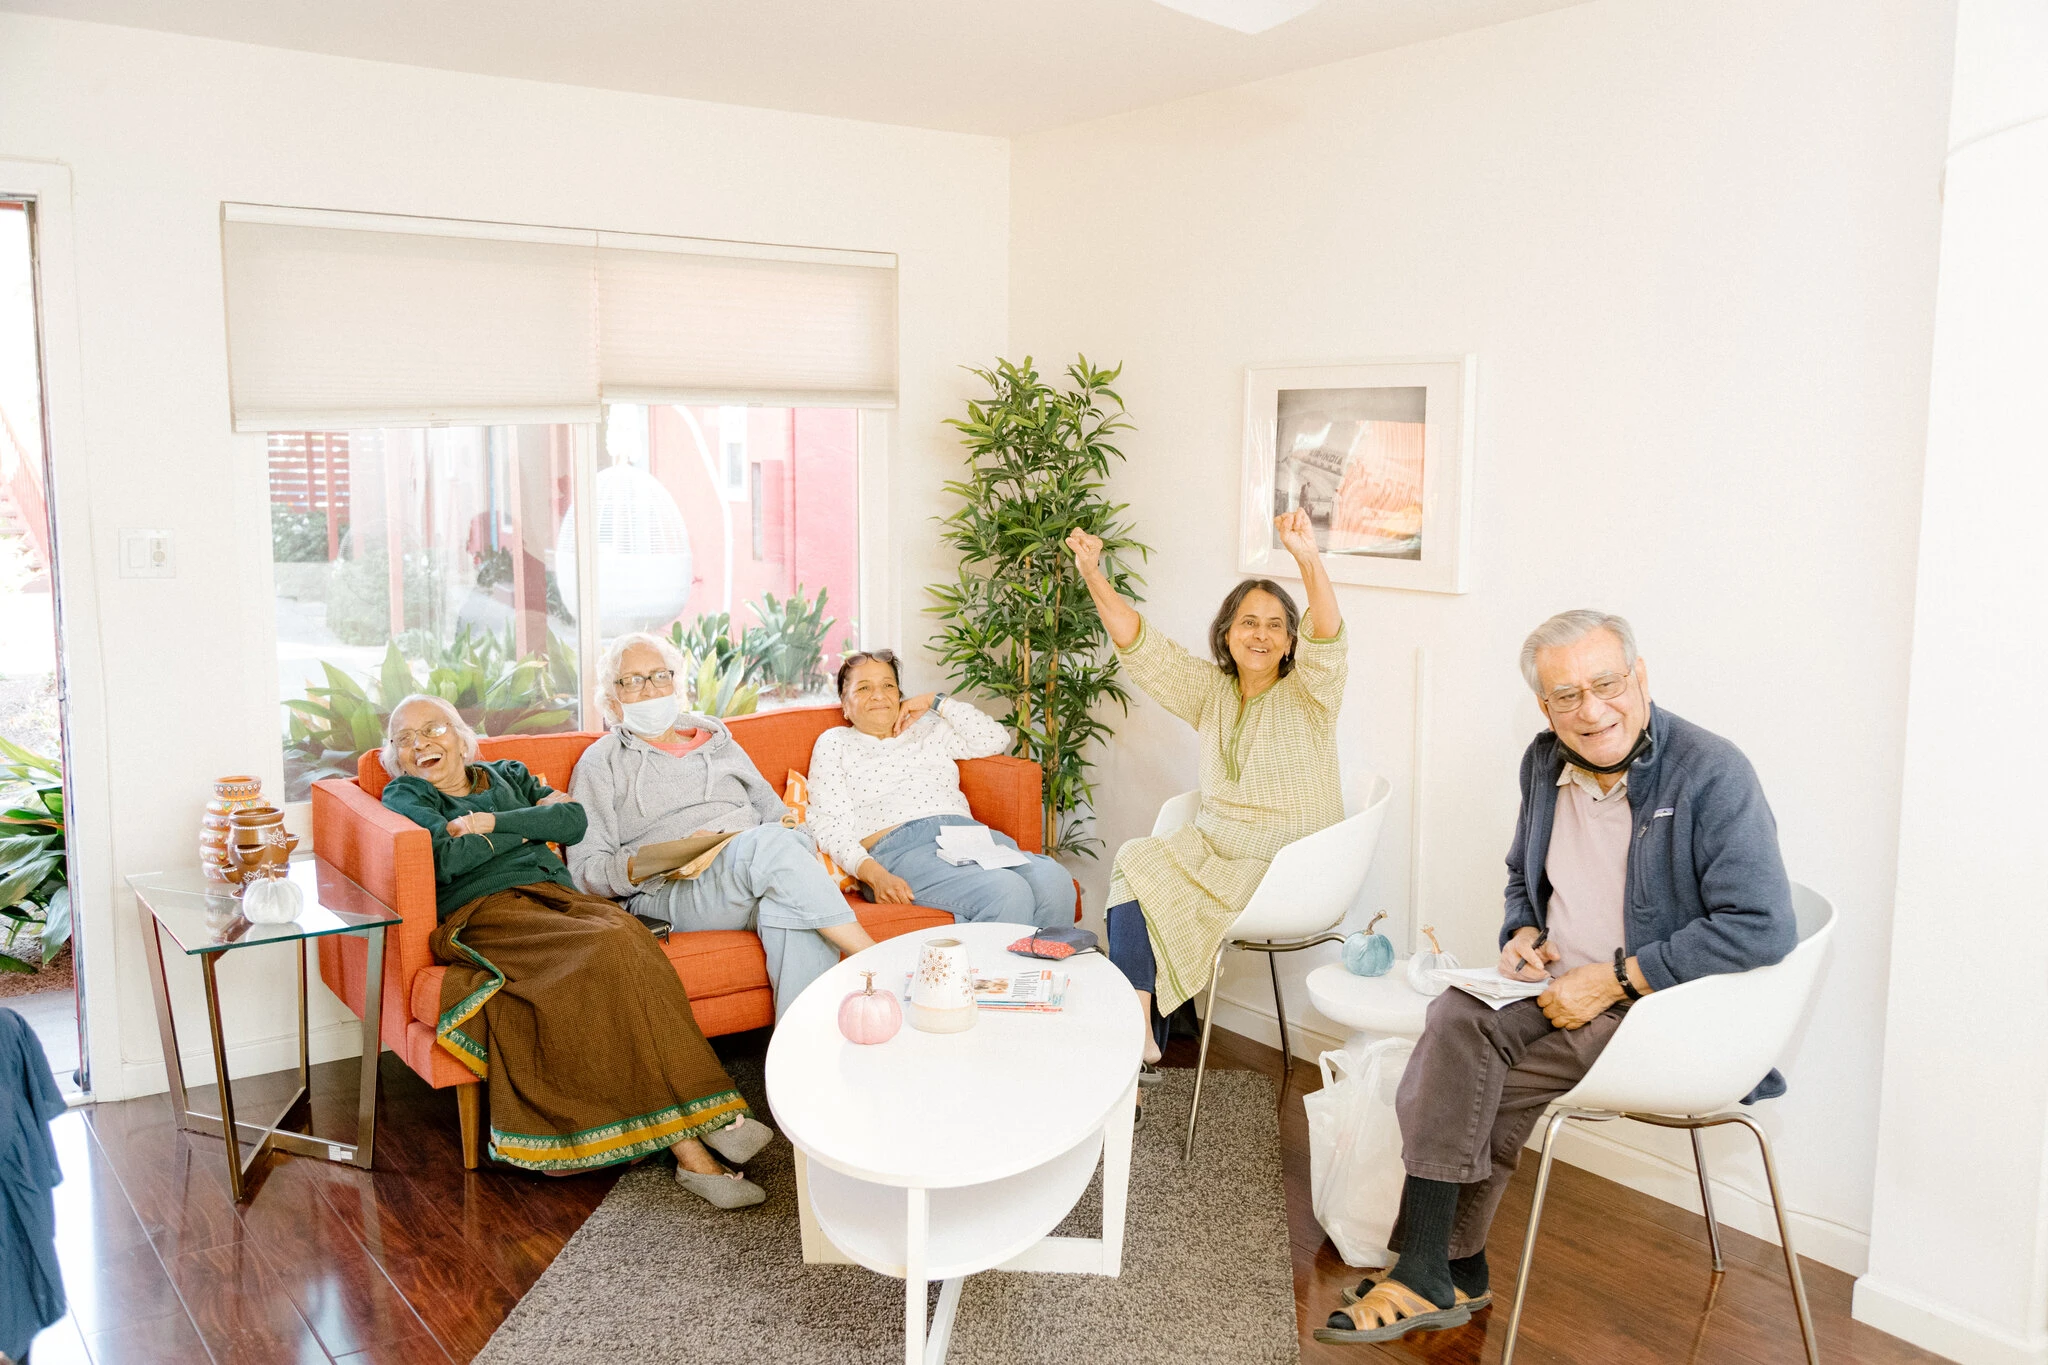 Residents of Priya Living playing a group game of Wordle inside one of the units.